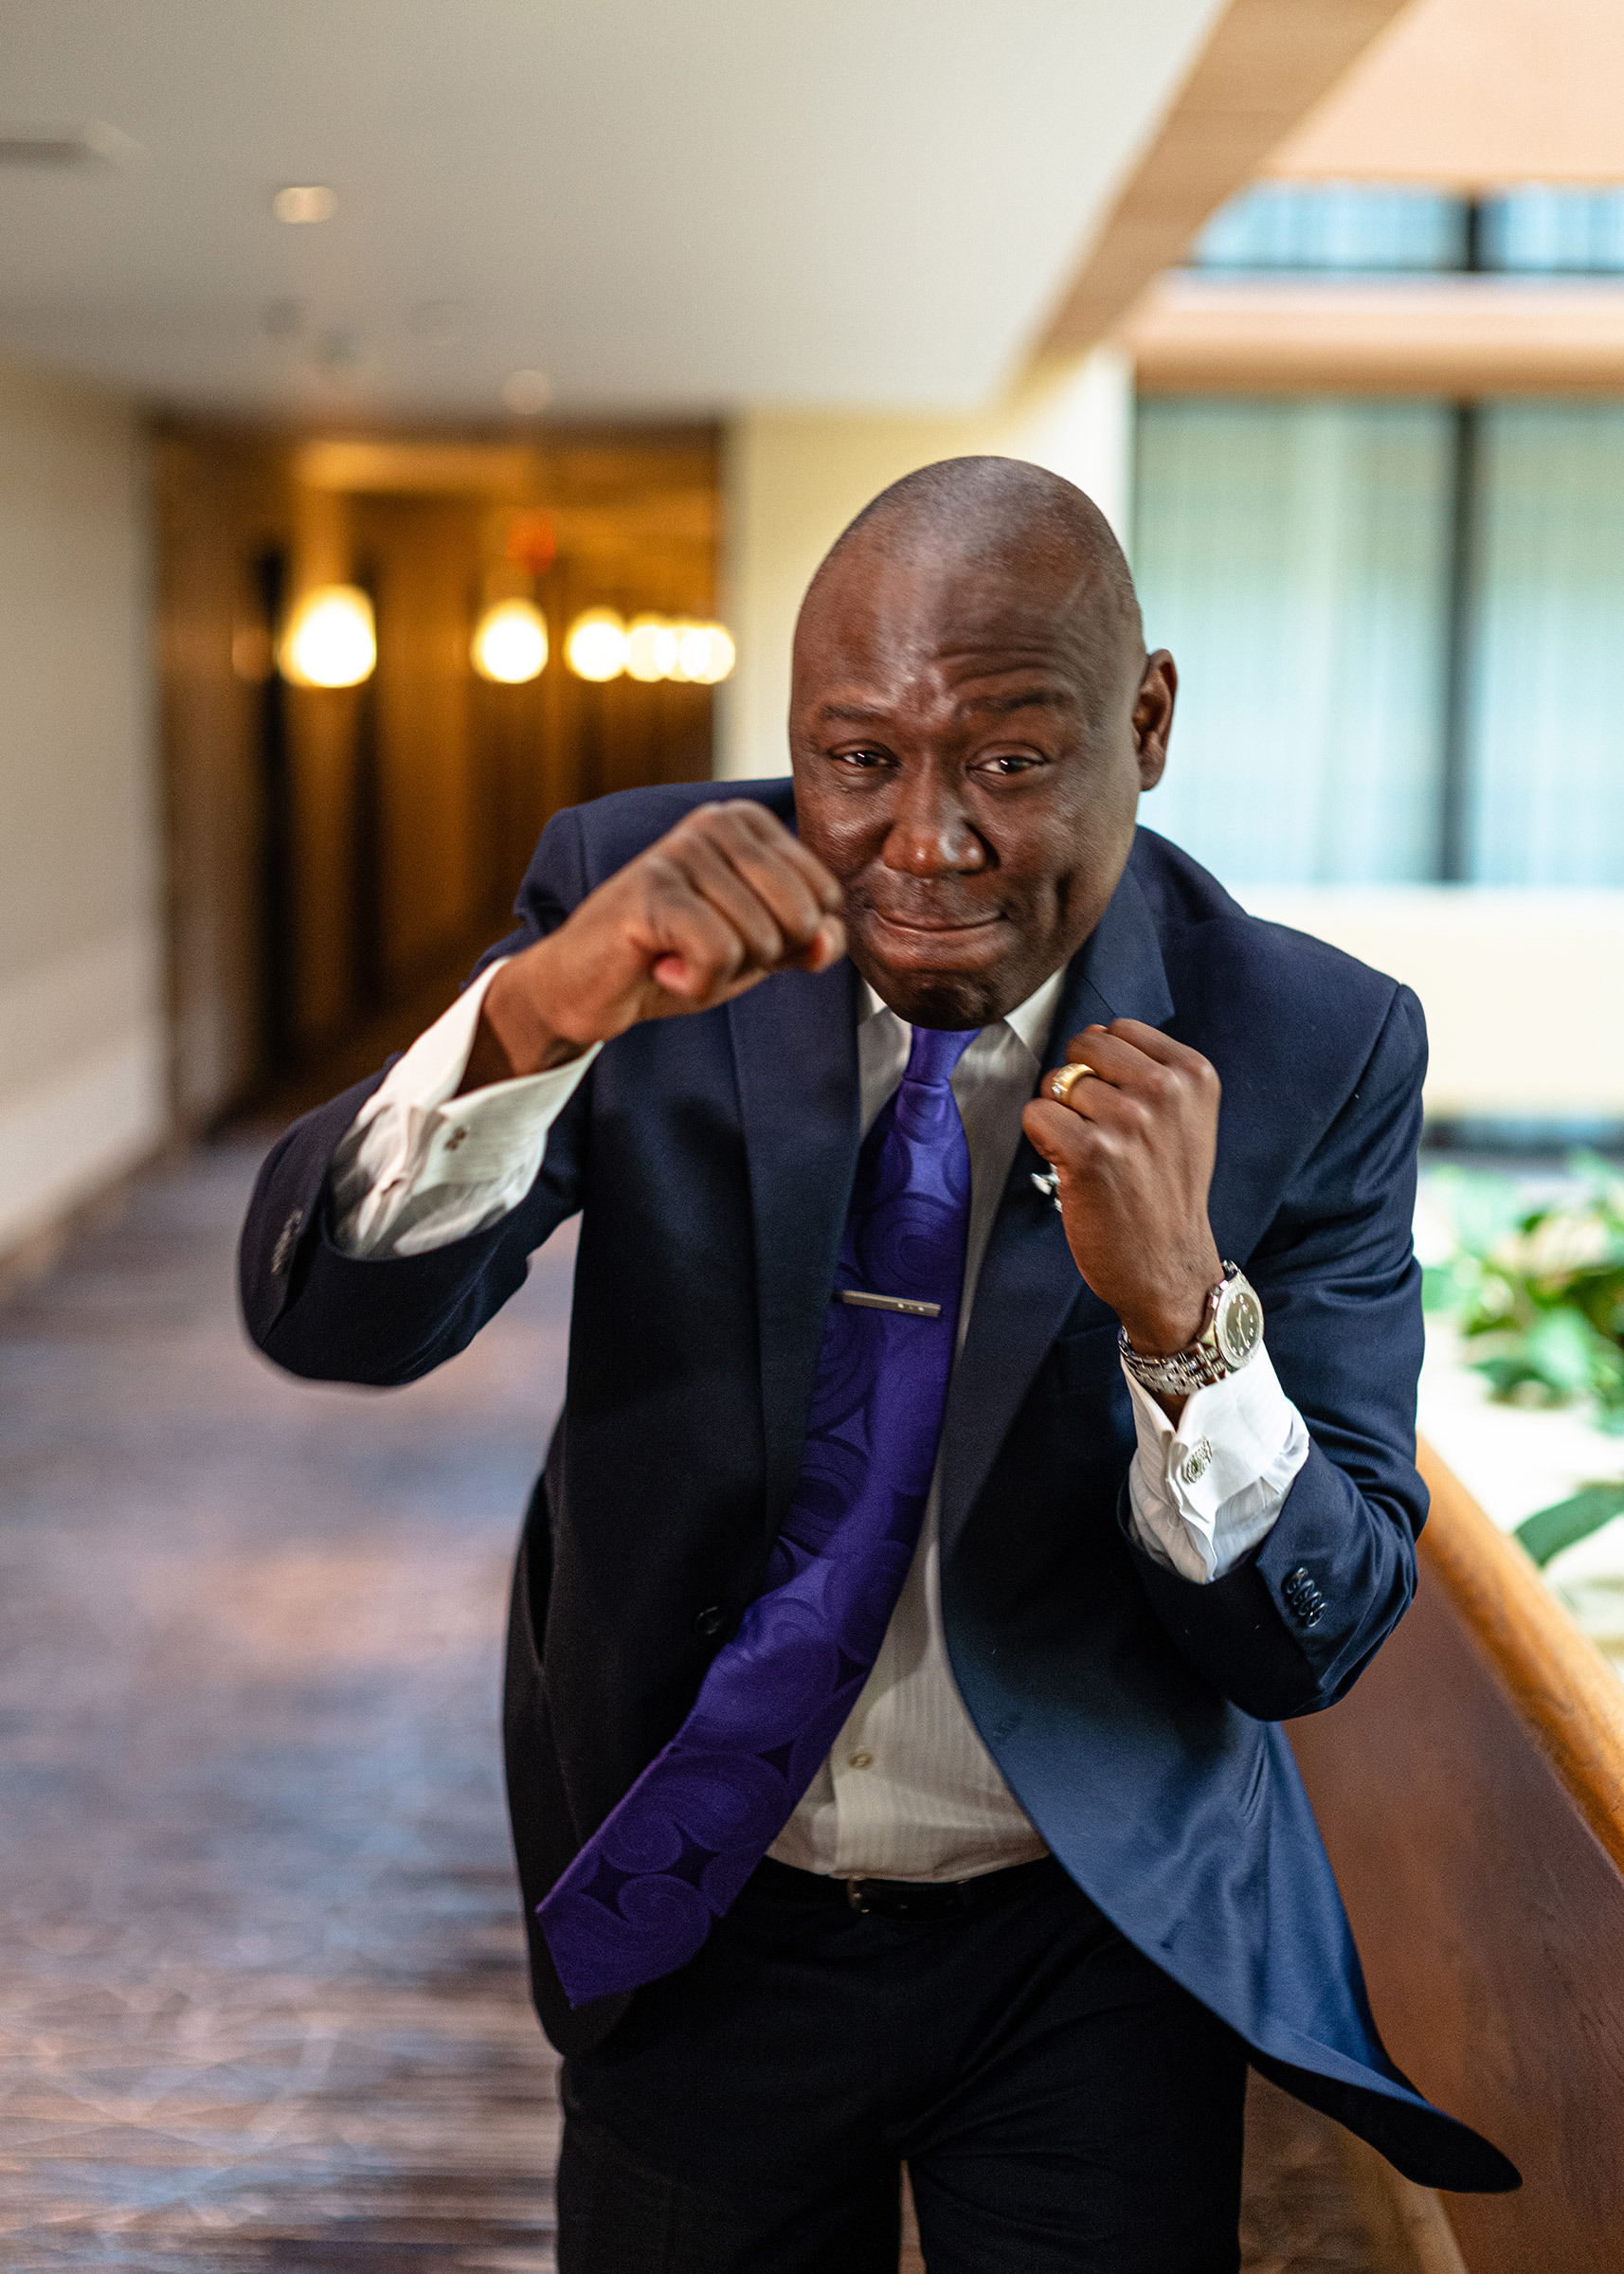 Attorney Ben Crump poses for a photograph on June 7, 2020, at a Houston hotel.